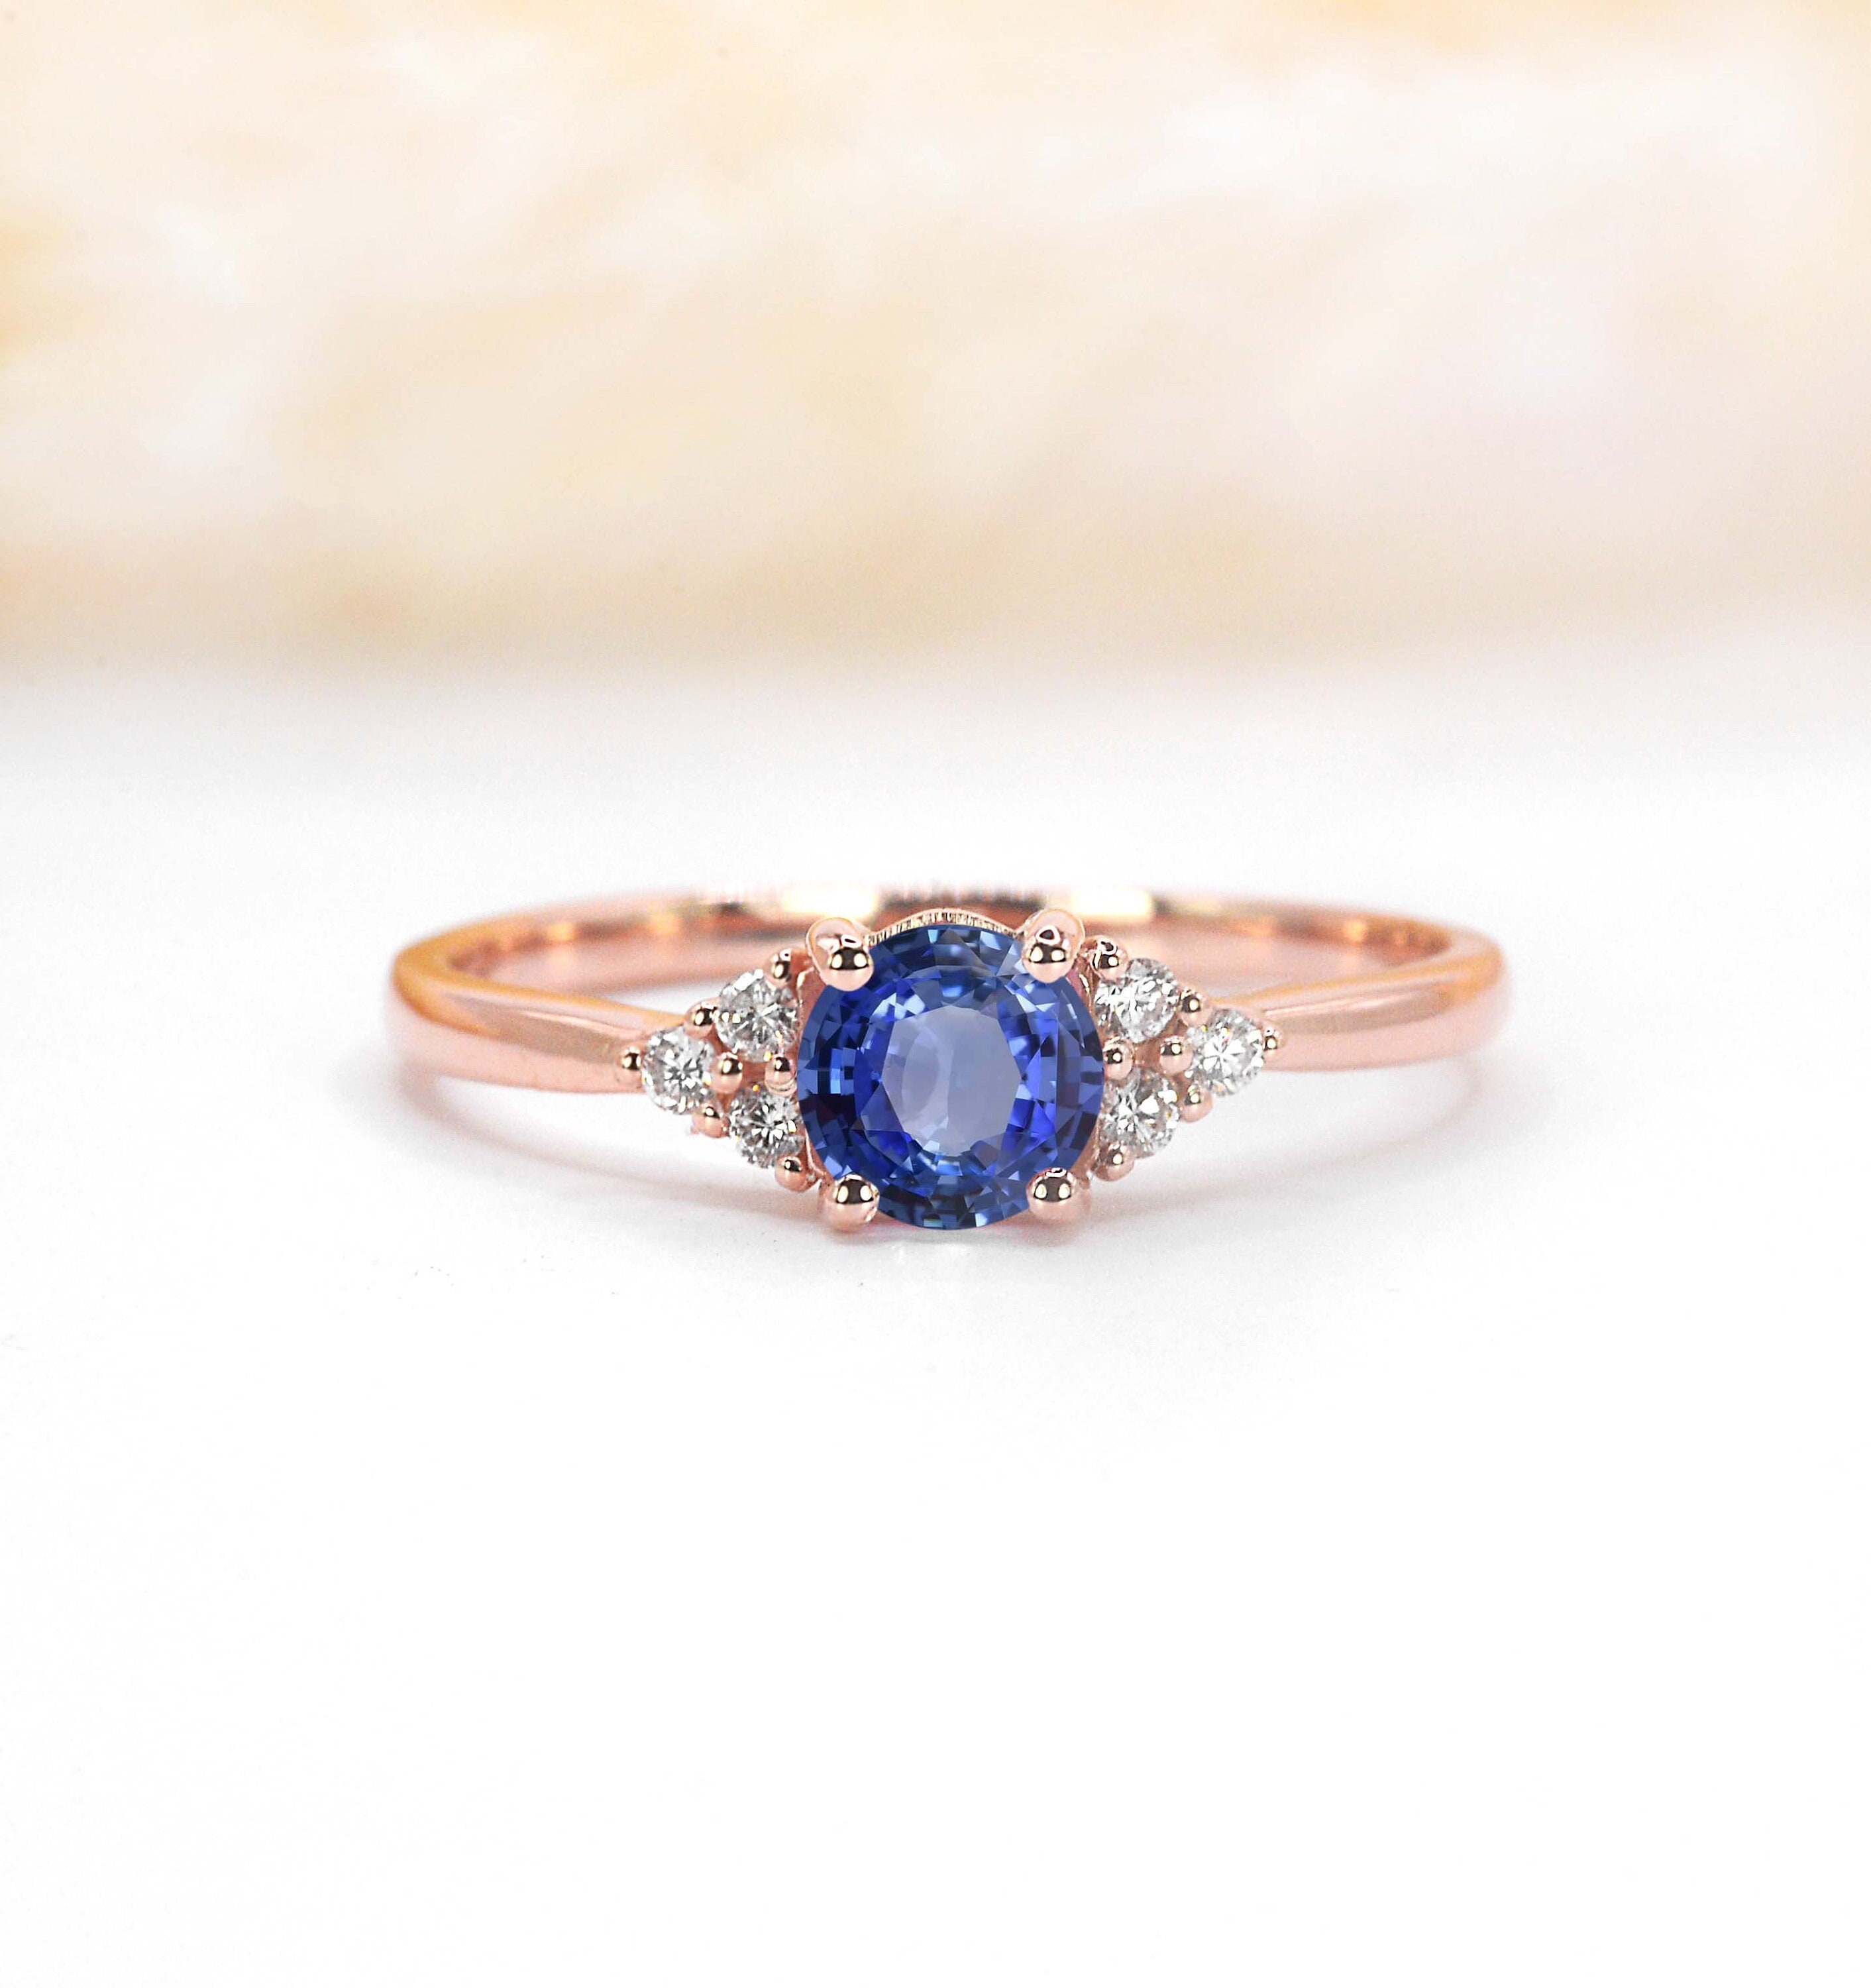 Natural Round Blue Sapphire Engagement Ring | Art Deco & Diamond Solid Rose, Yellow, White Gold Or Platinum Handmade